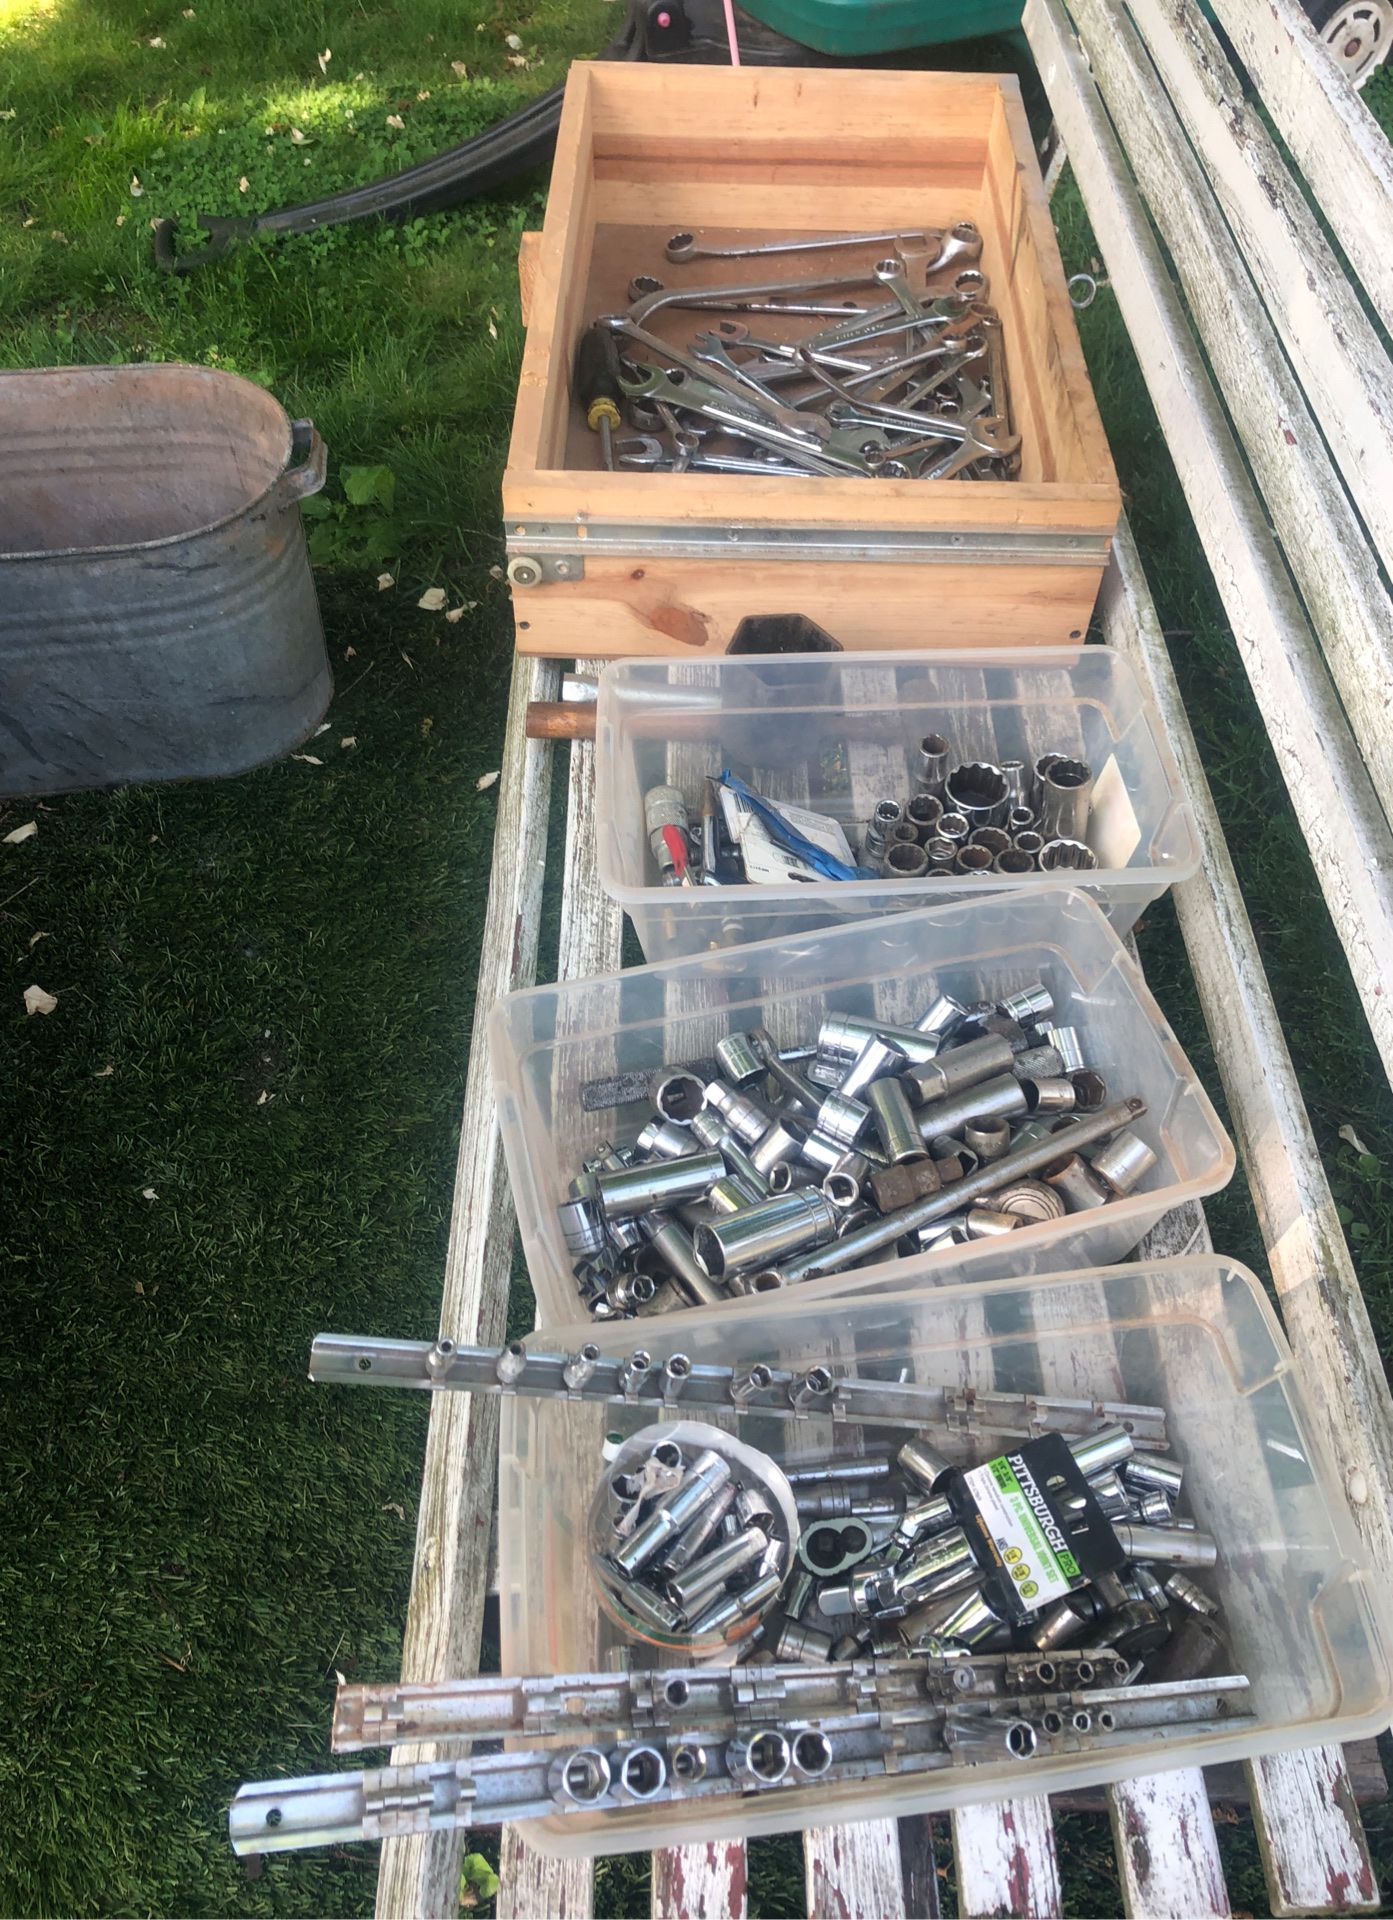 Assorted sockets and wrenches